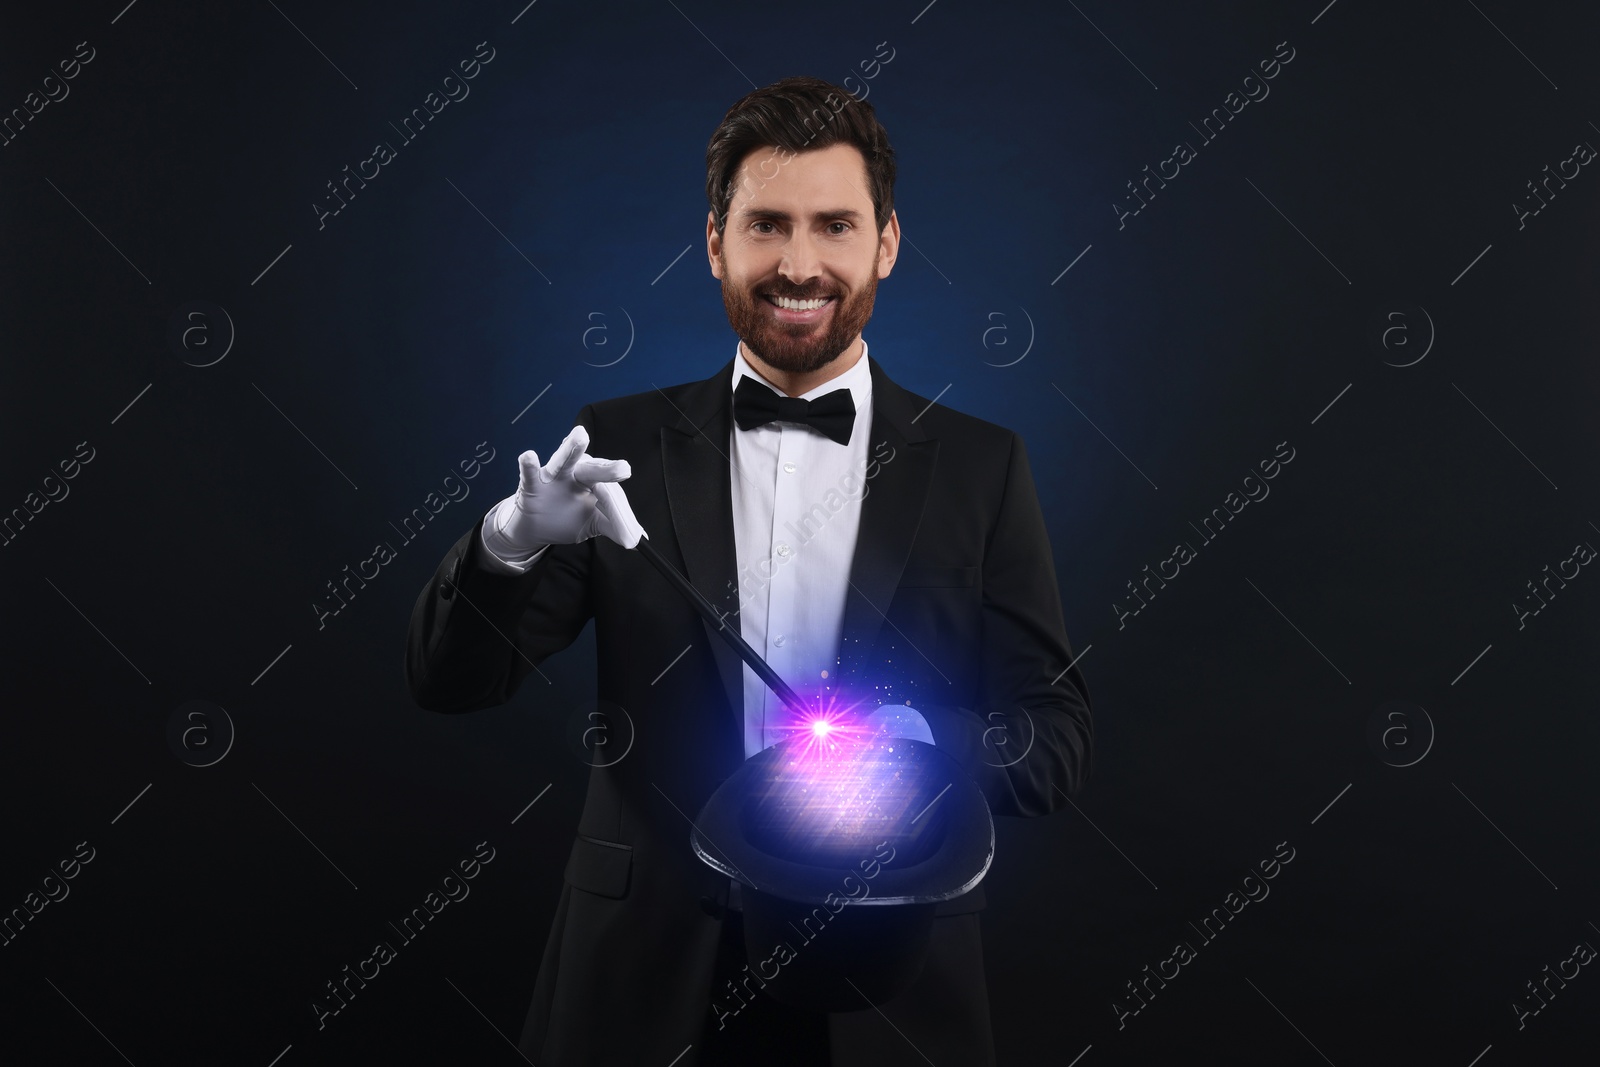 Image of Magician showing trick with wand and top hat on dark background. Fantastic light coming out of hat